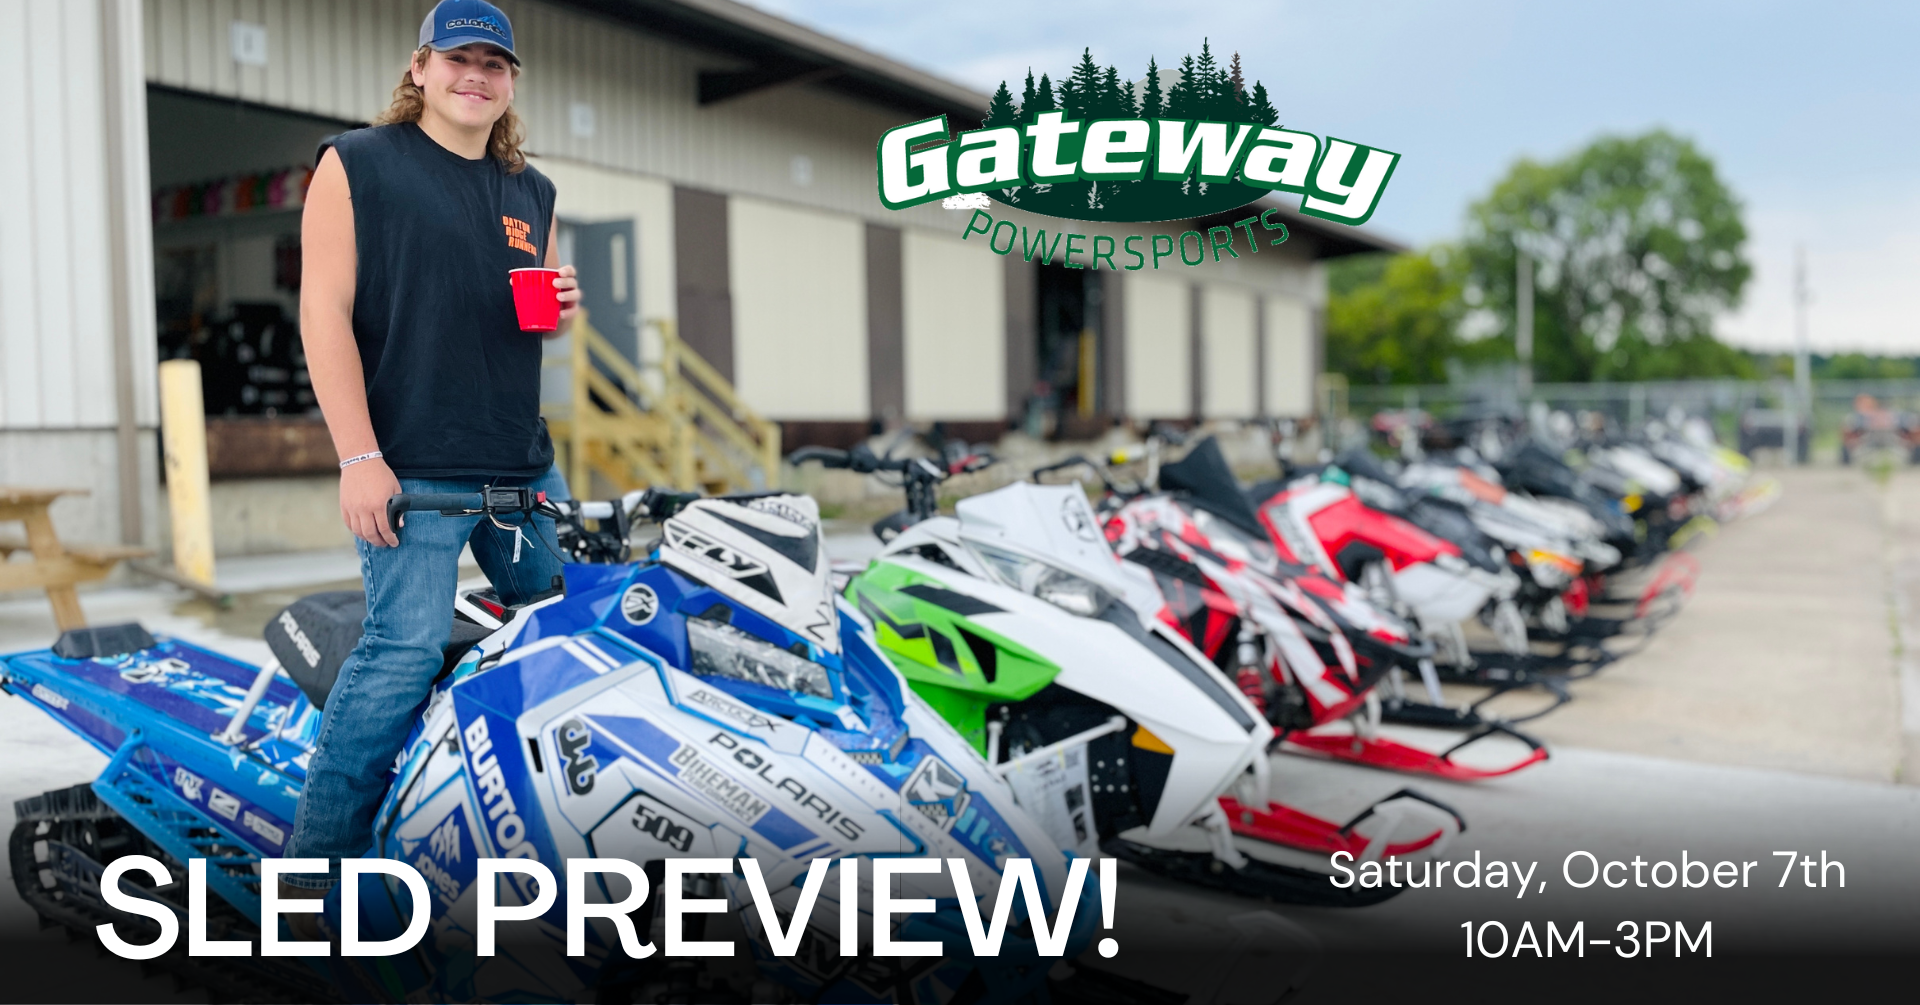 Come to Gateway Powersports on Sat. October 7th from 10am-3pm to our open house to Preview and Shop all of our Sleds before they hit the market.